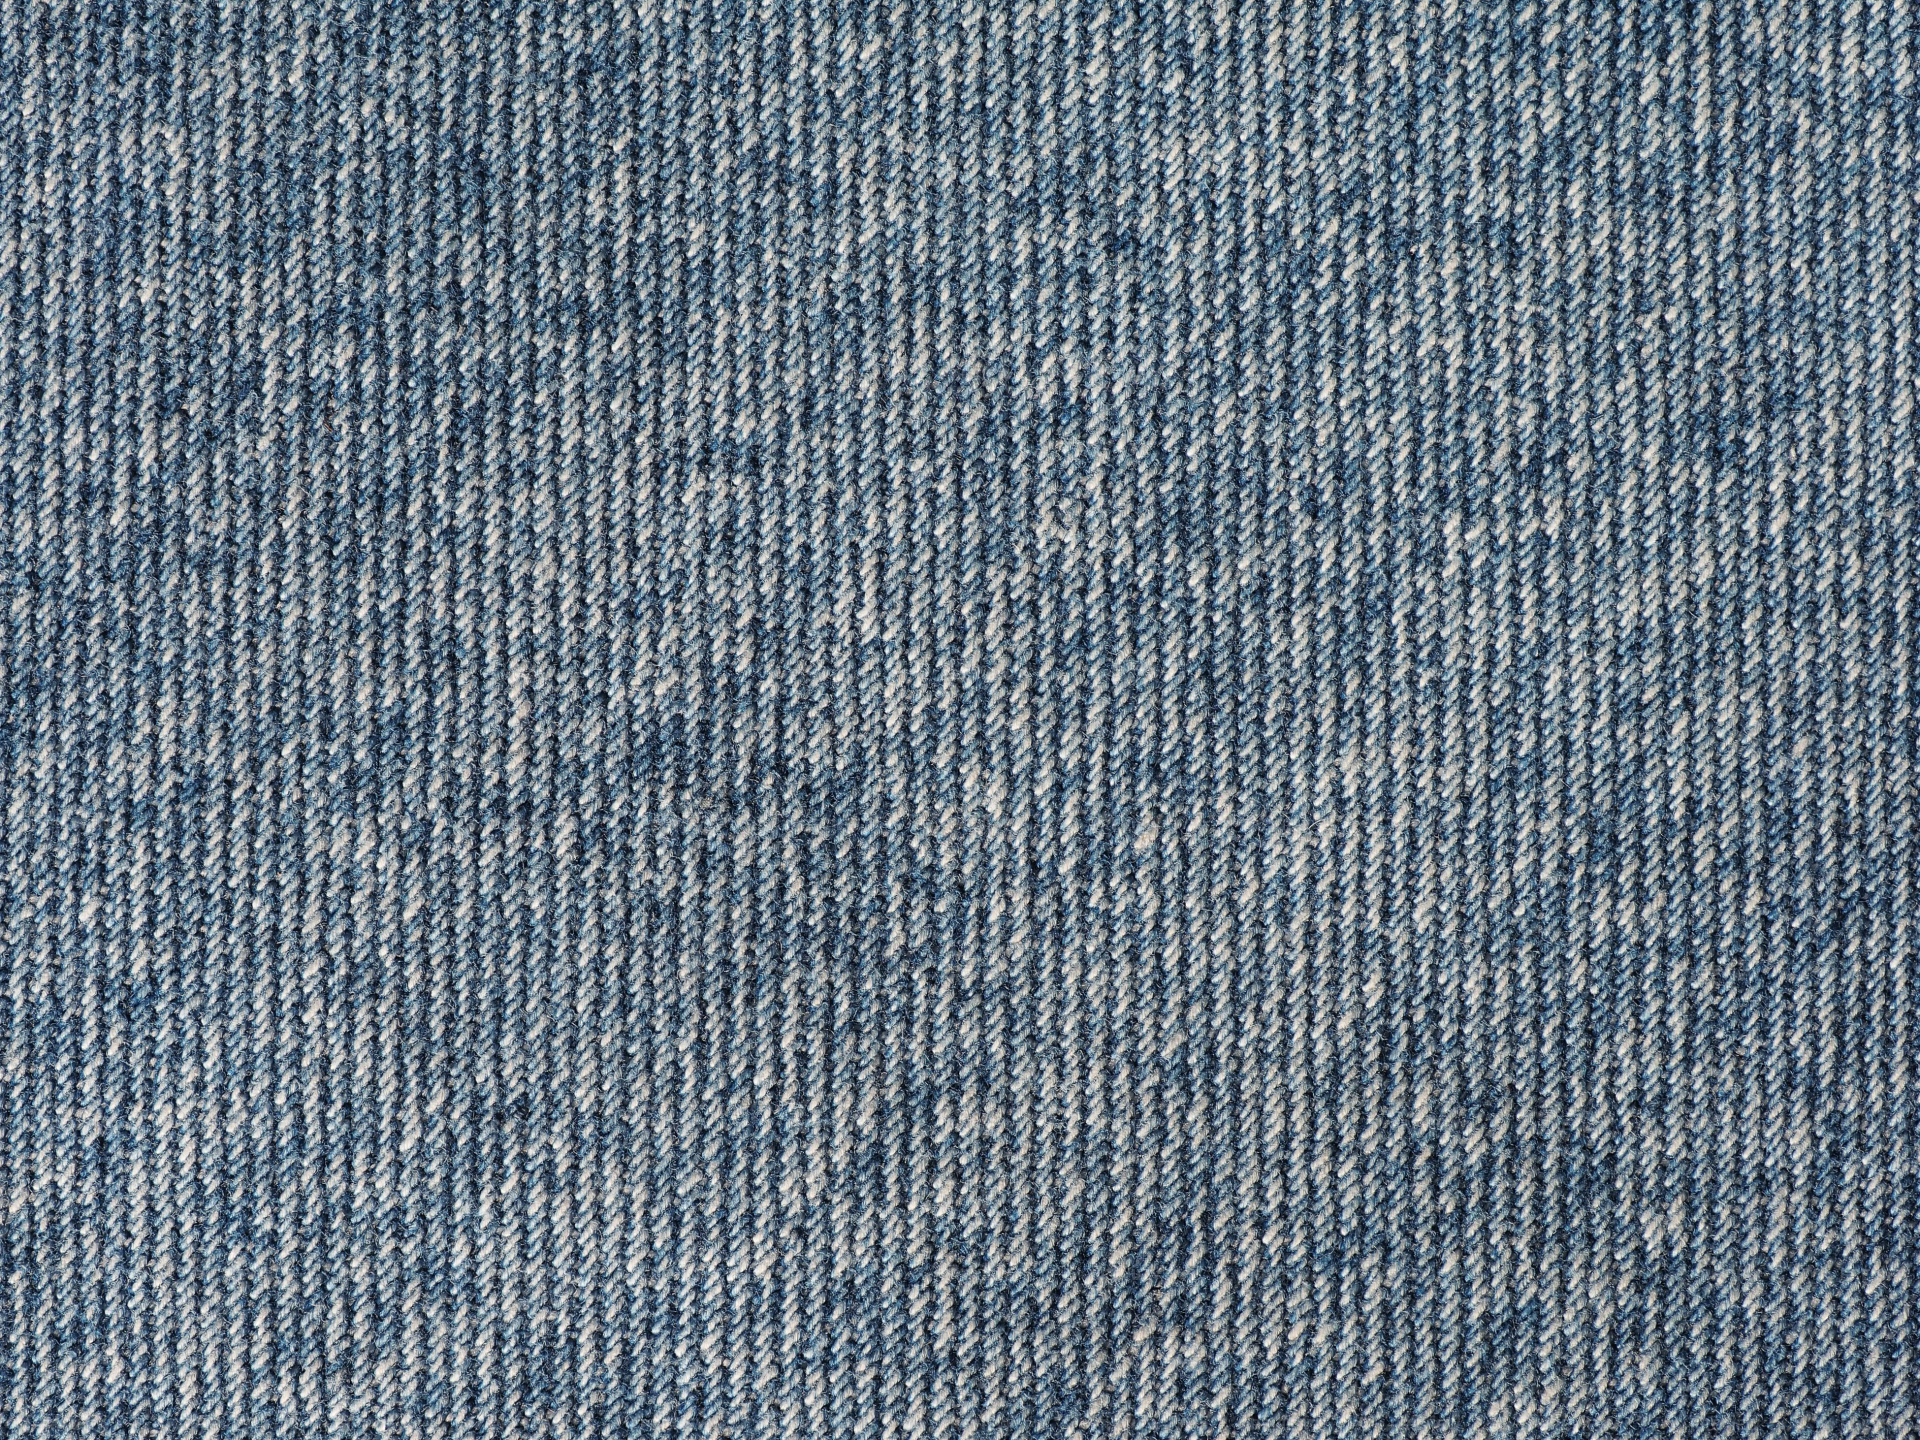 Moss Home | Made in the USA - Billie Denim Fabric Swatch